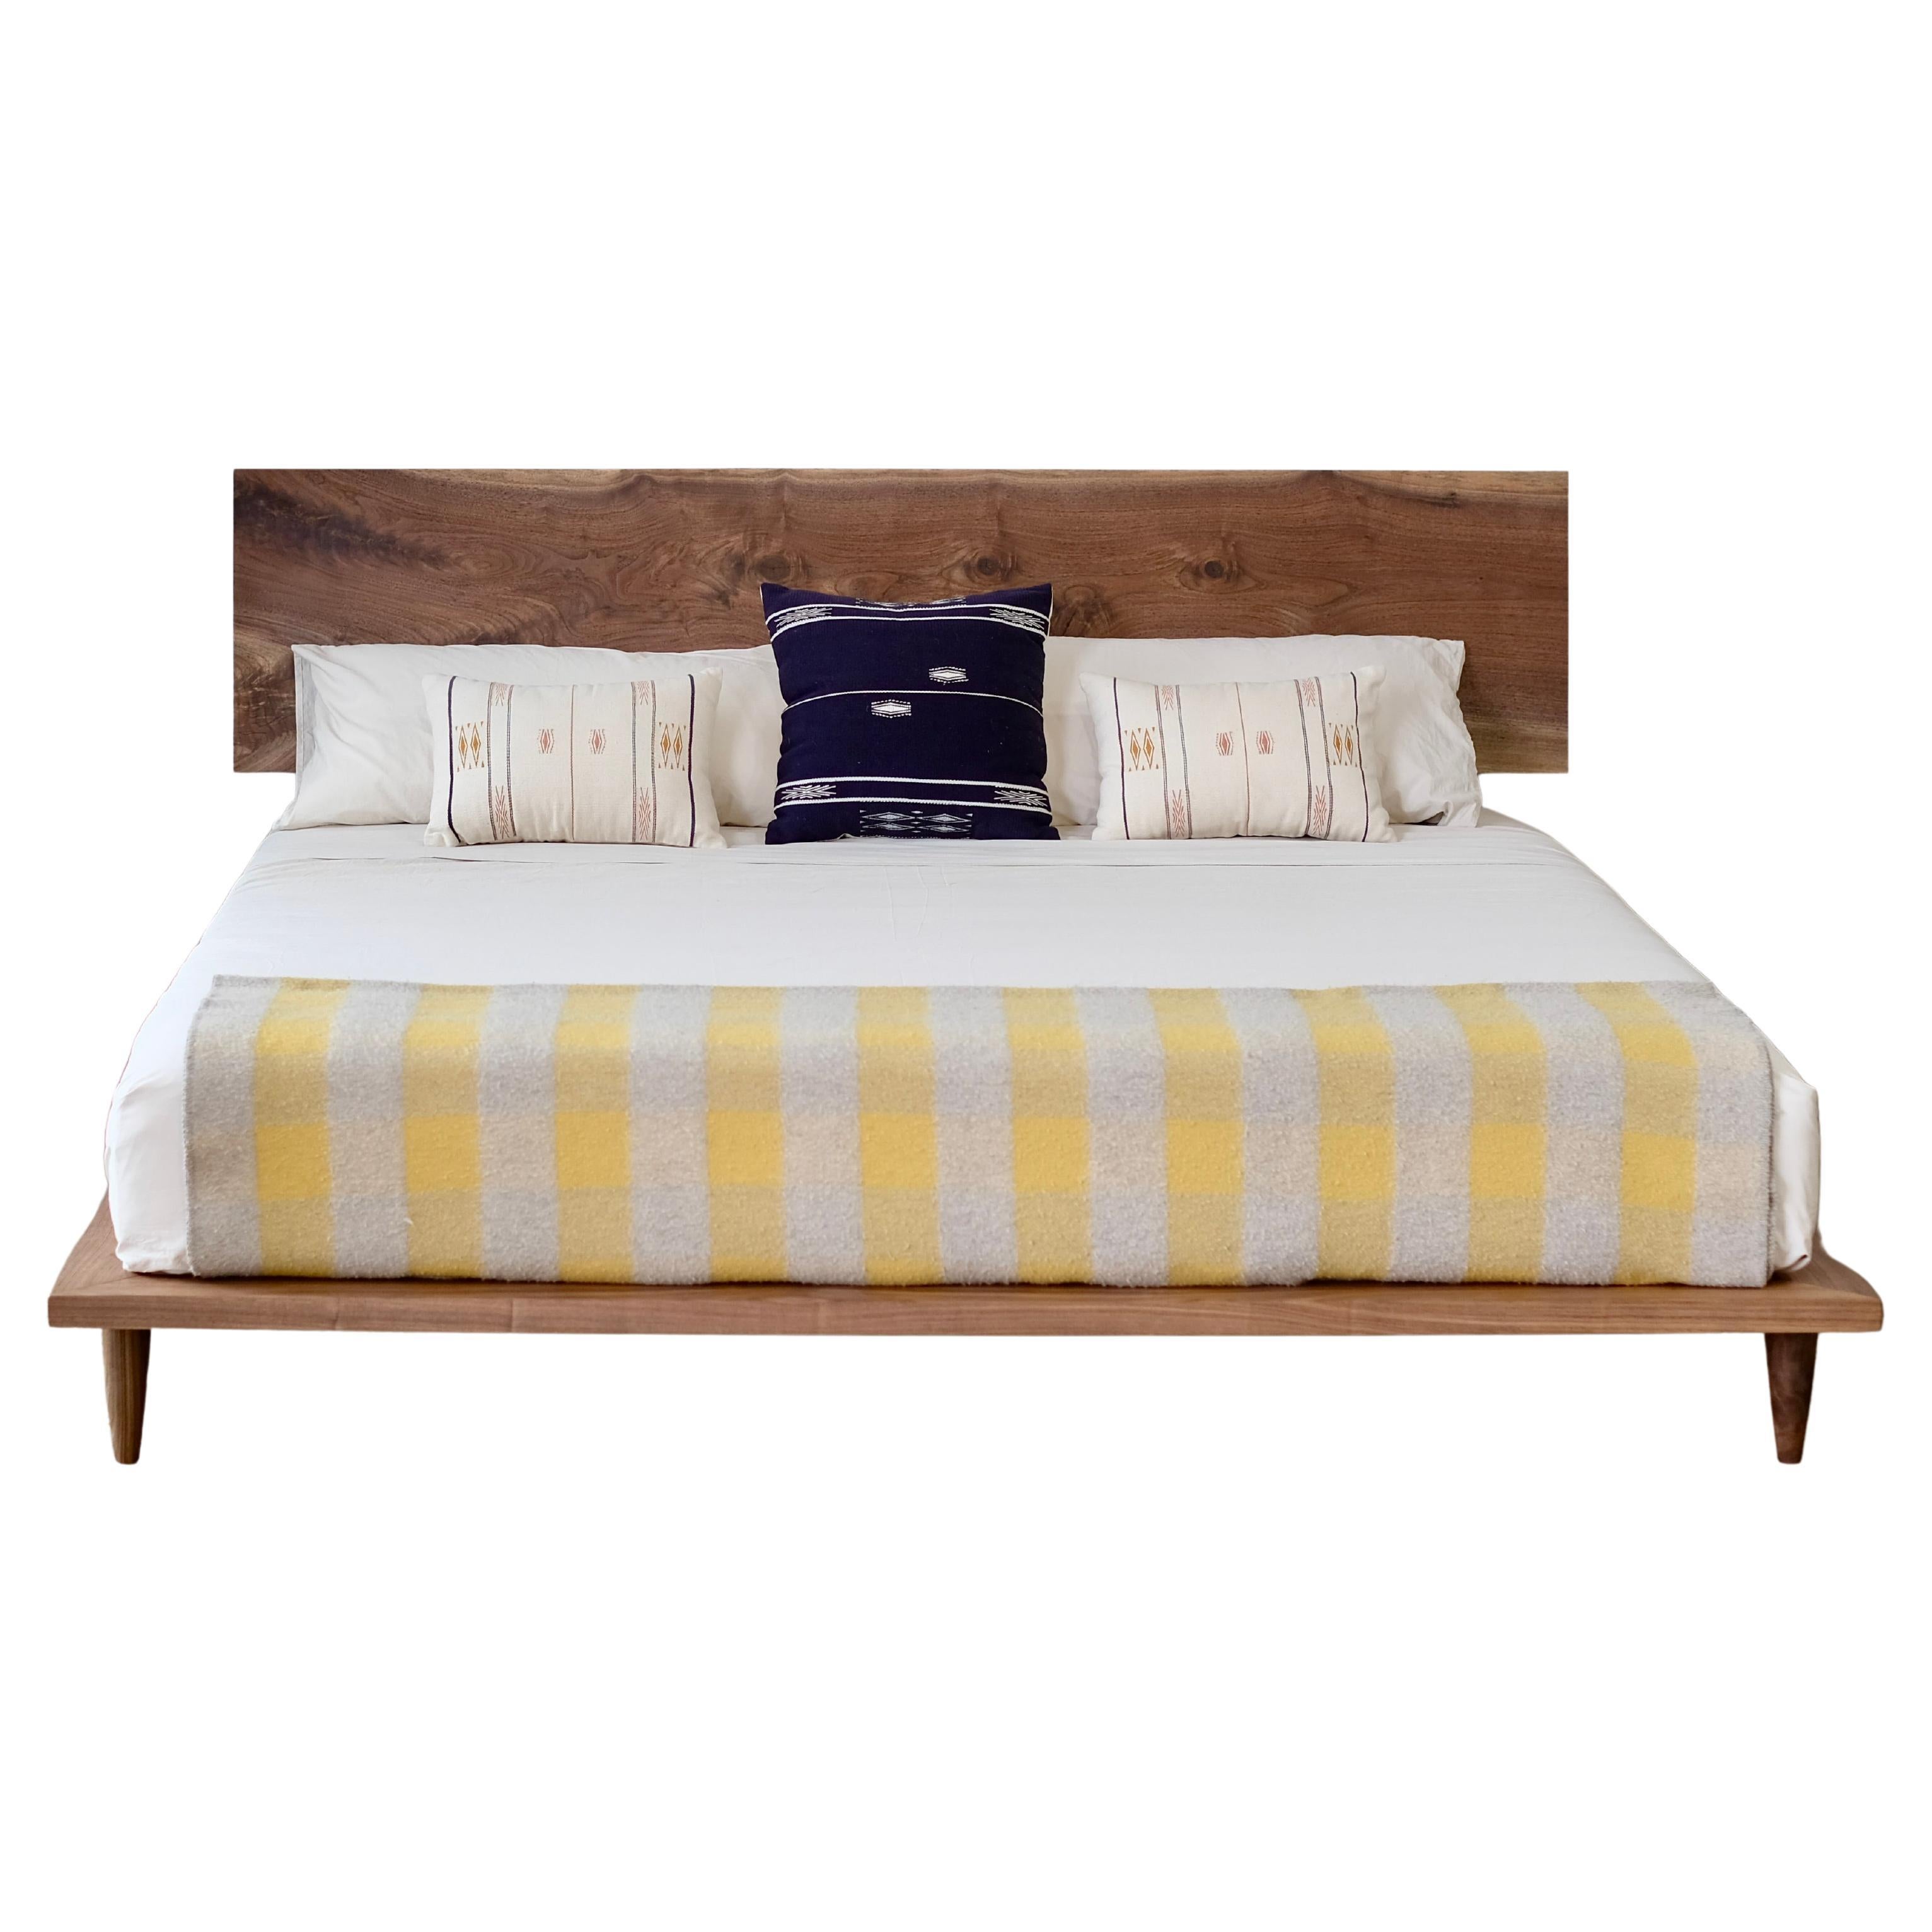 Mid Century Modern Platform Bed With Solid Wood Headboard in Walnut For Sale